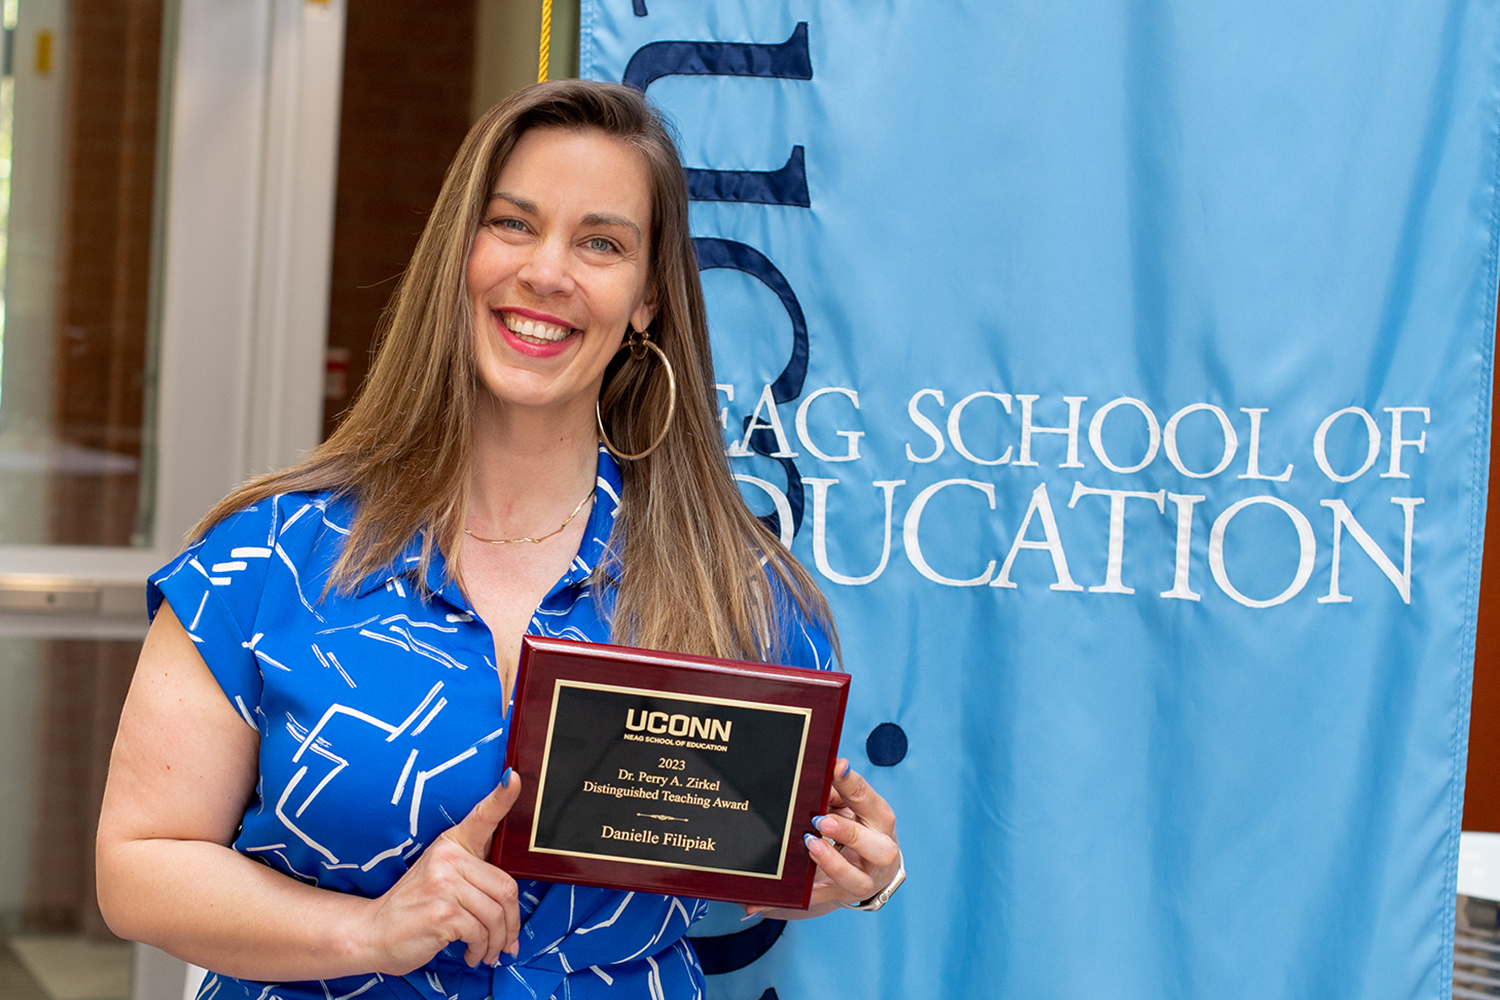 Danielle Filipiak holds her Zirkel award plaque while standing in front of the light blue Neag School of Education academic banner.